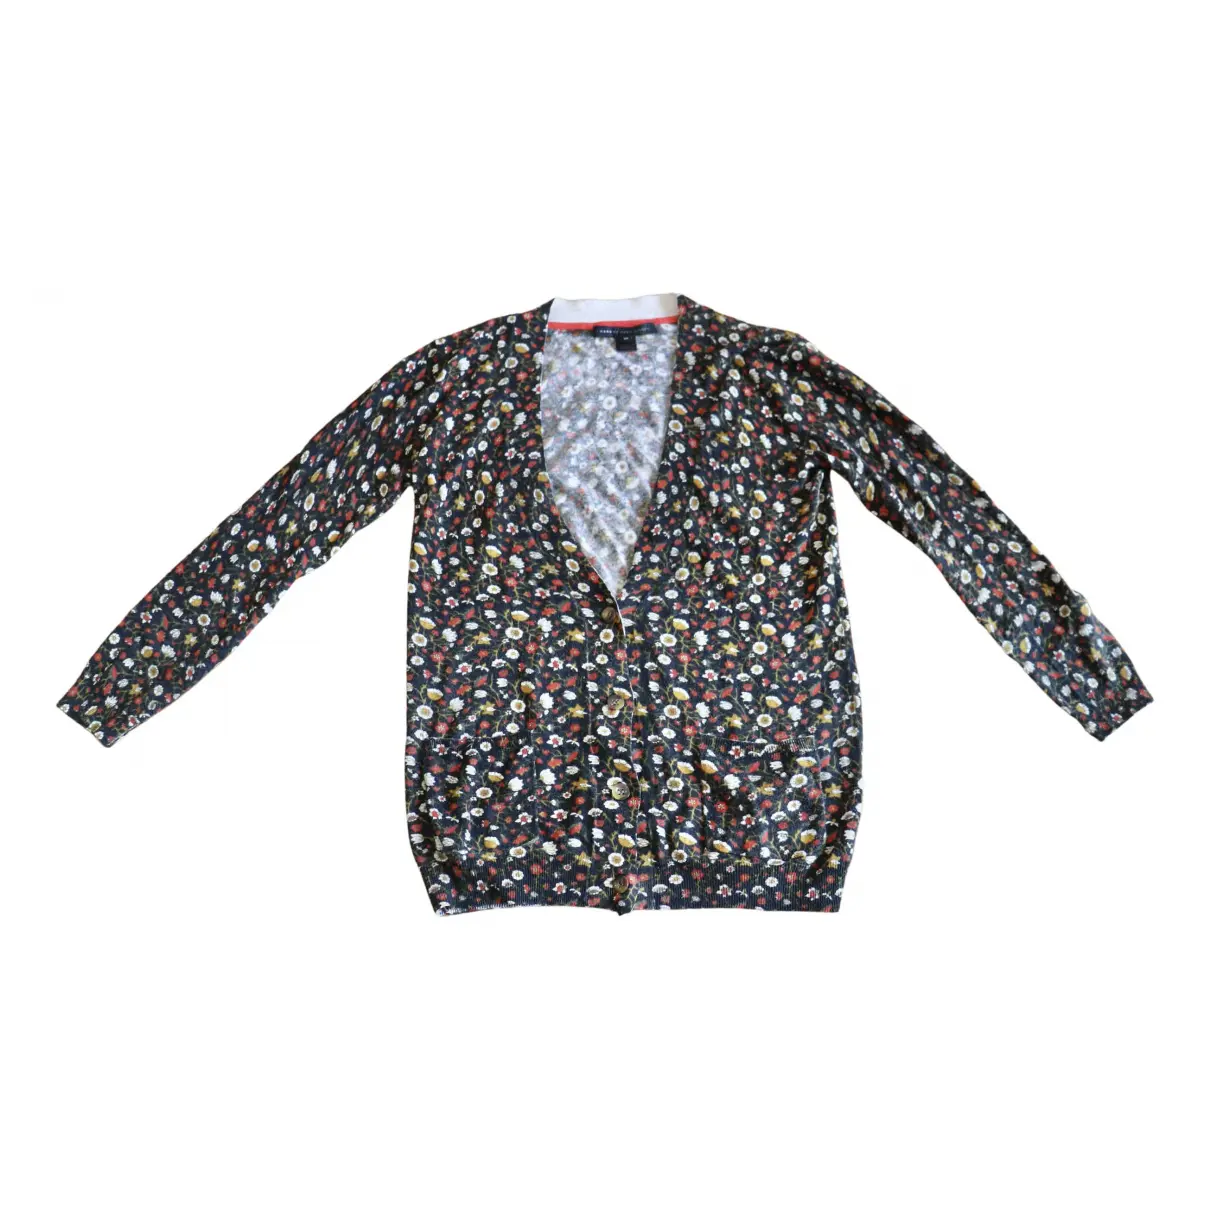 Cardigan Marc by Marc Jacobs